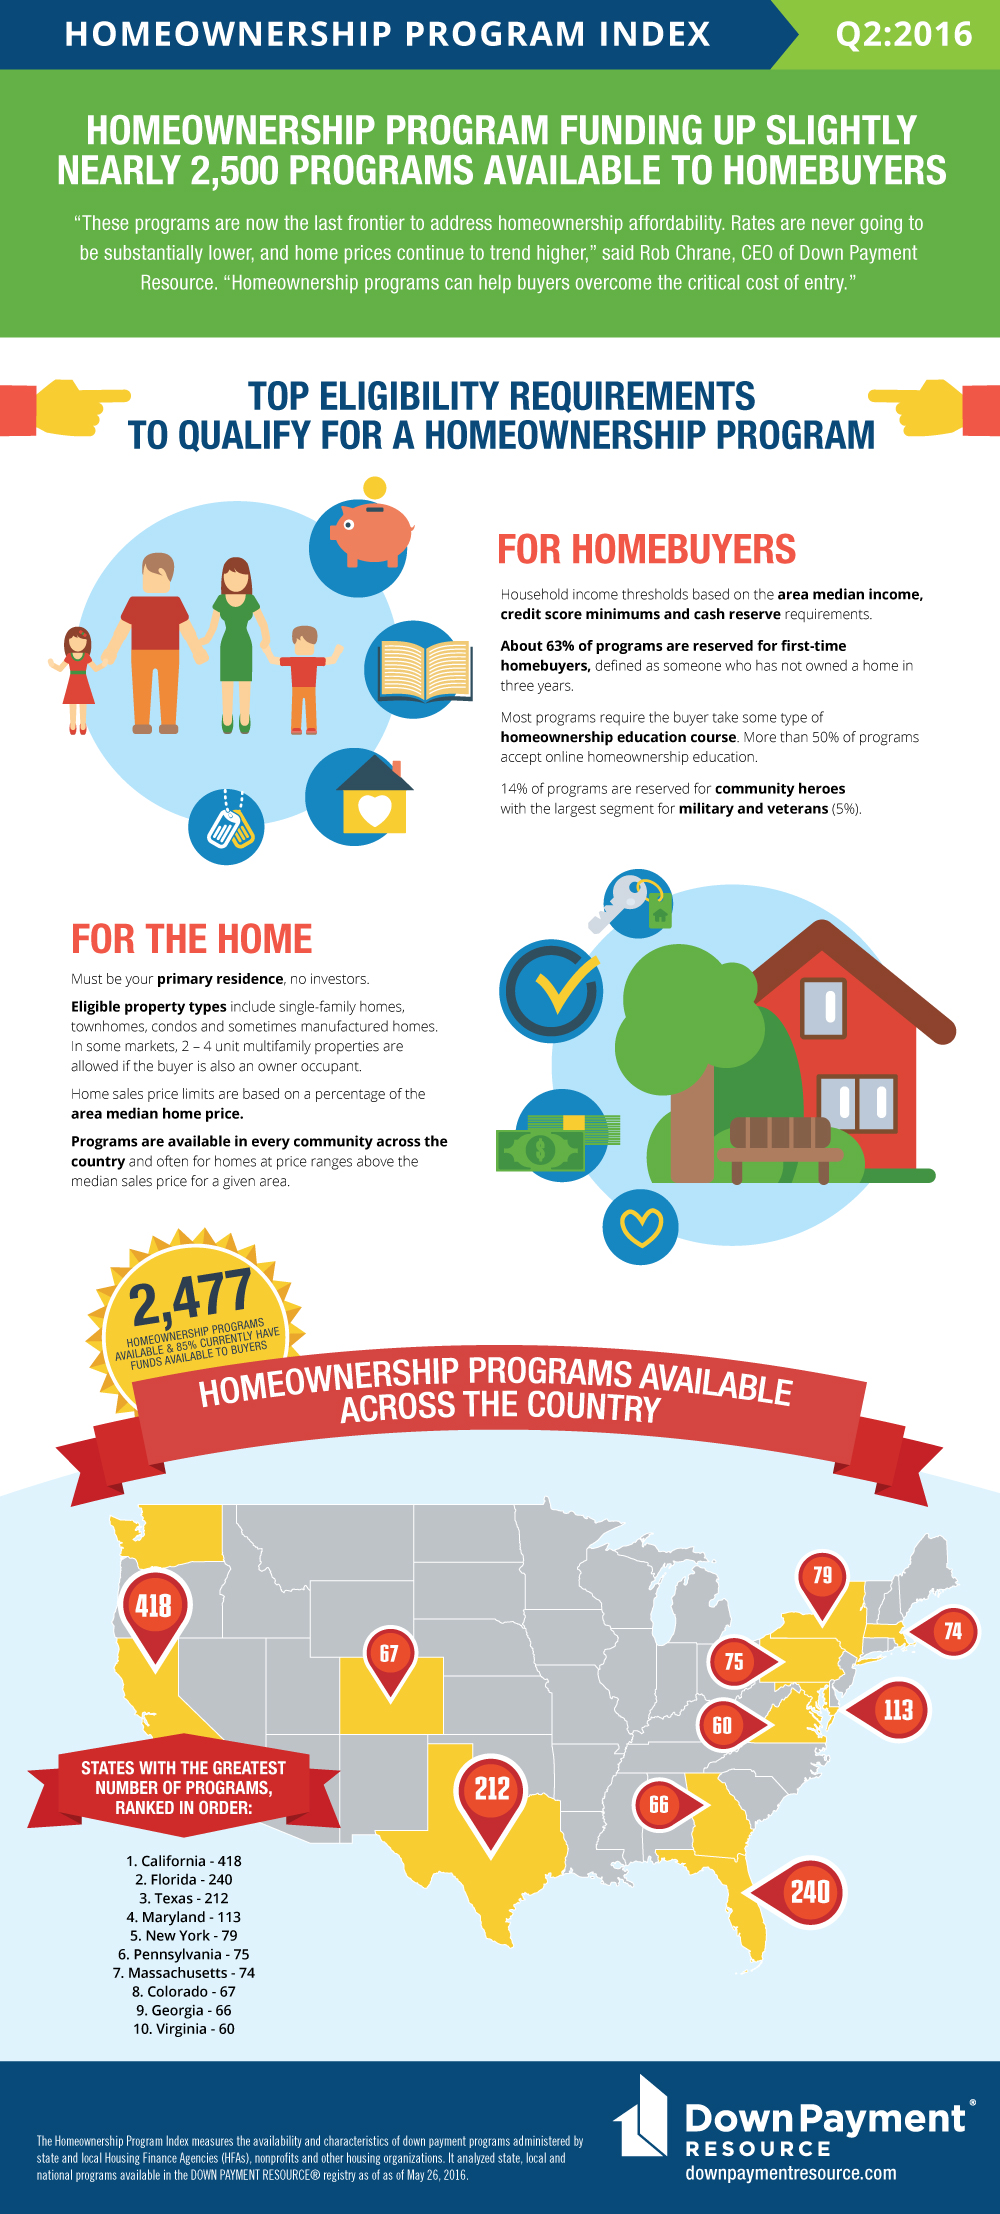 DPR Homeownership Program Index Released Nearly 2 500 Programs 